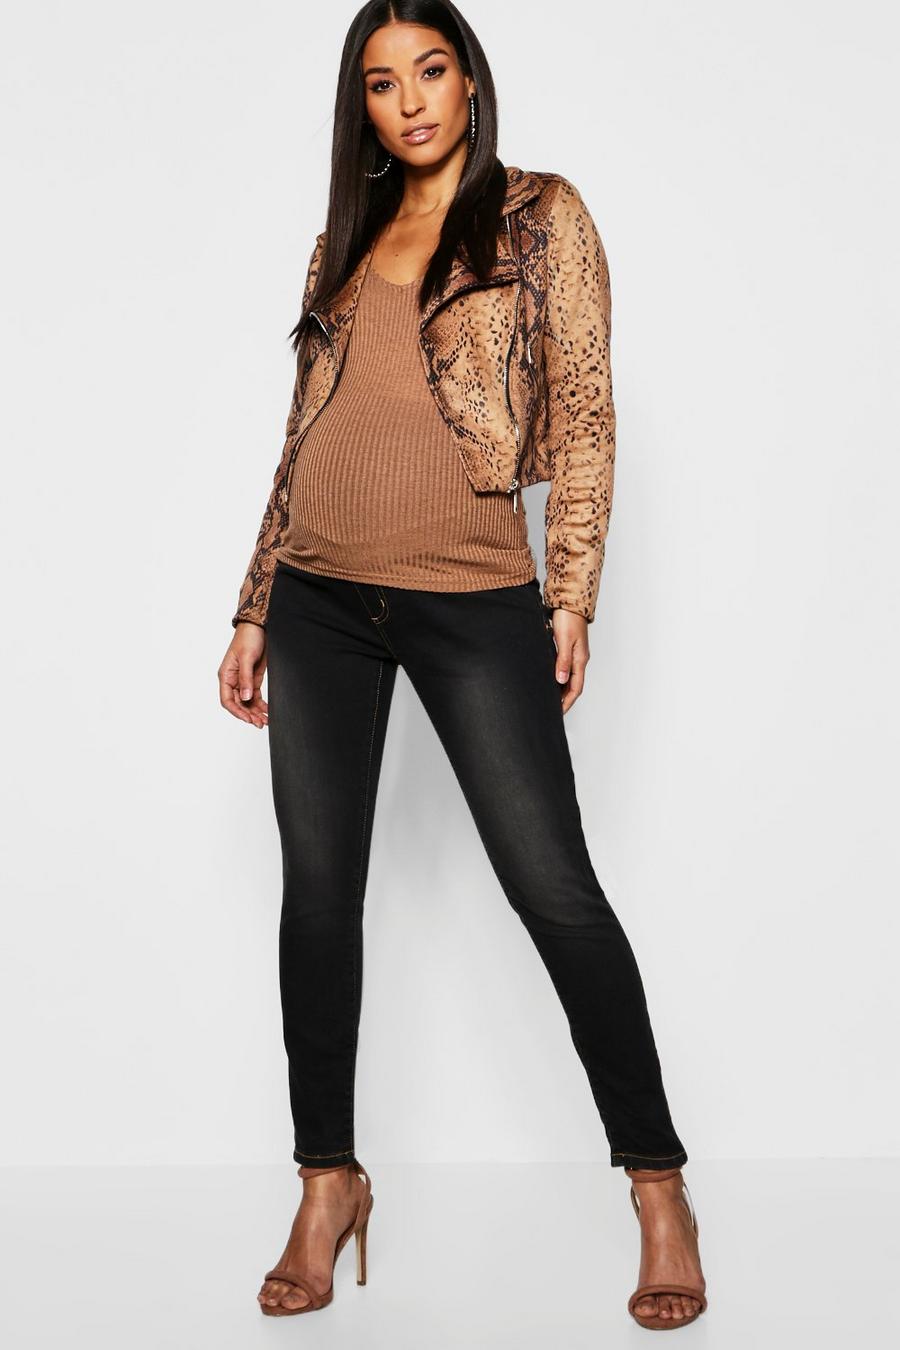 Black Maternity Over The Bump Skinny Jeans